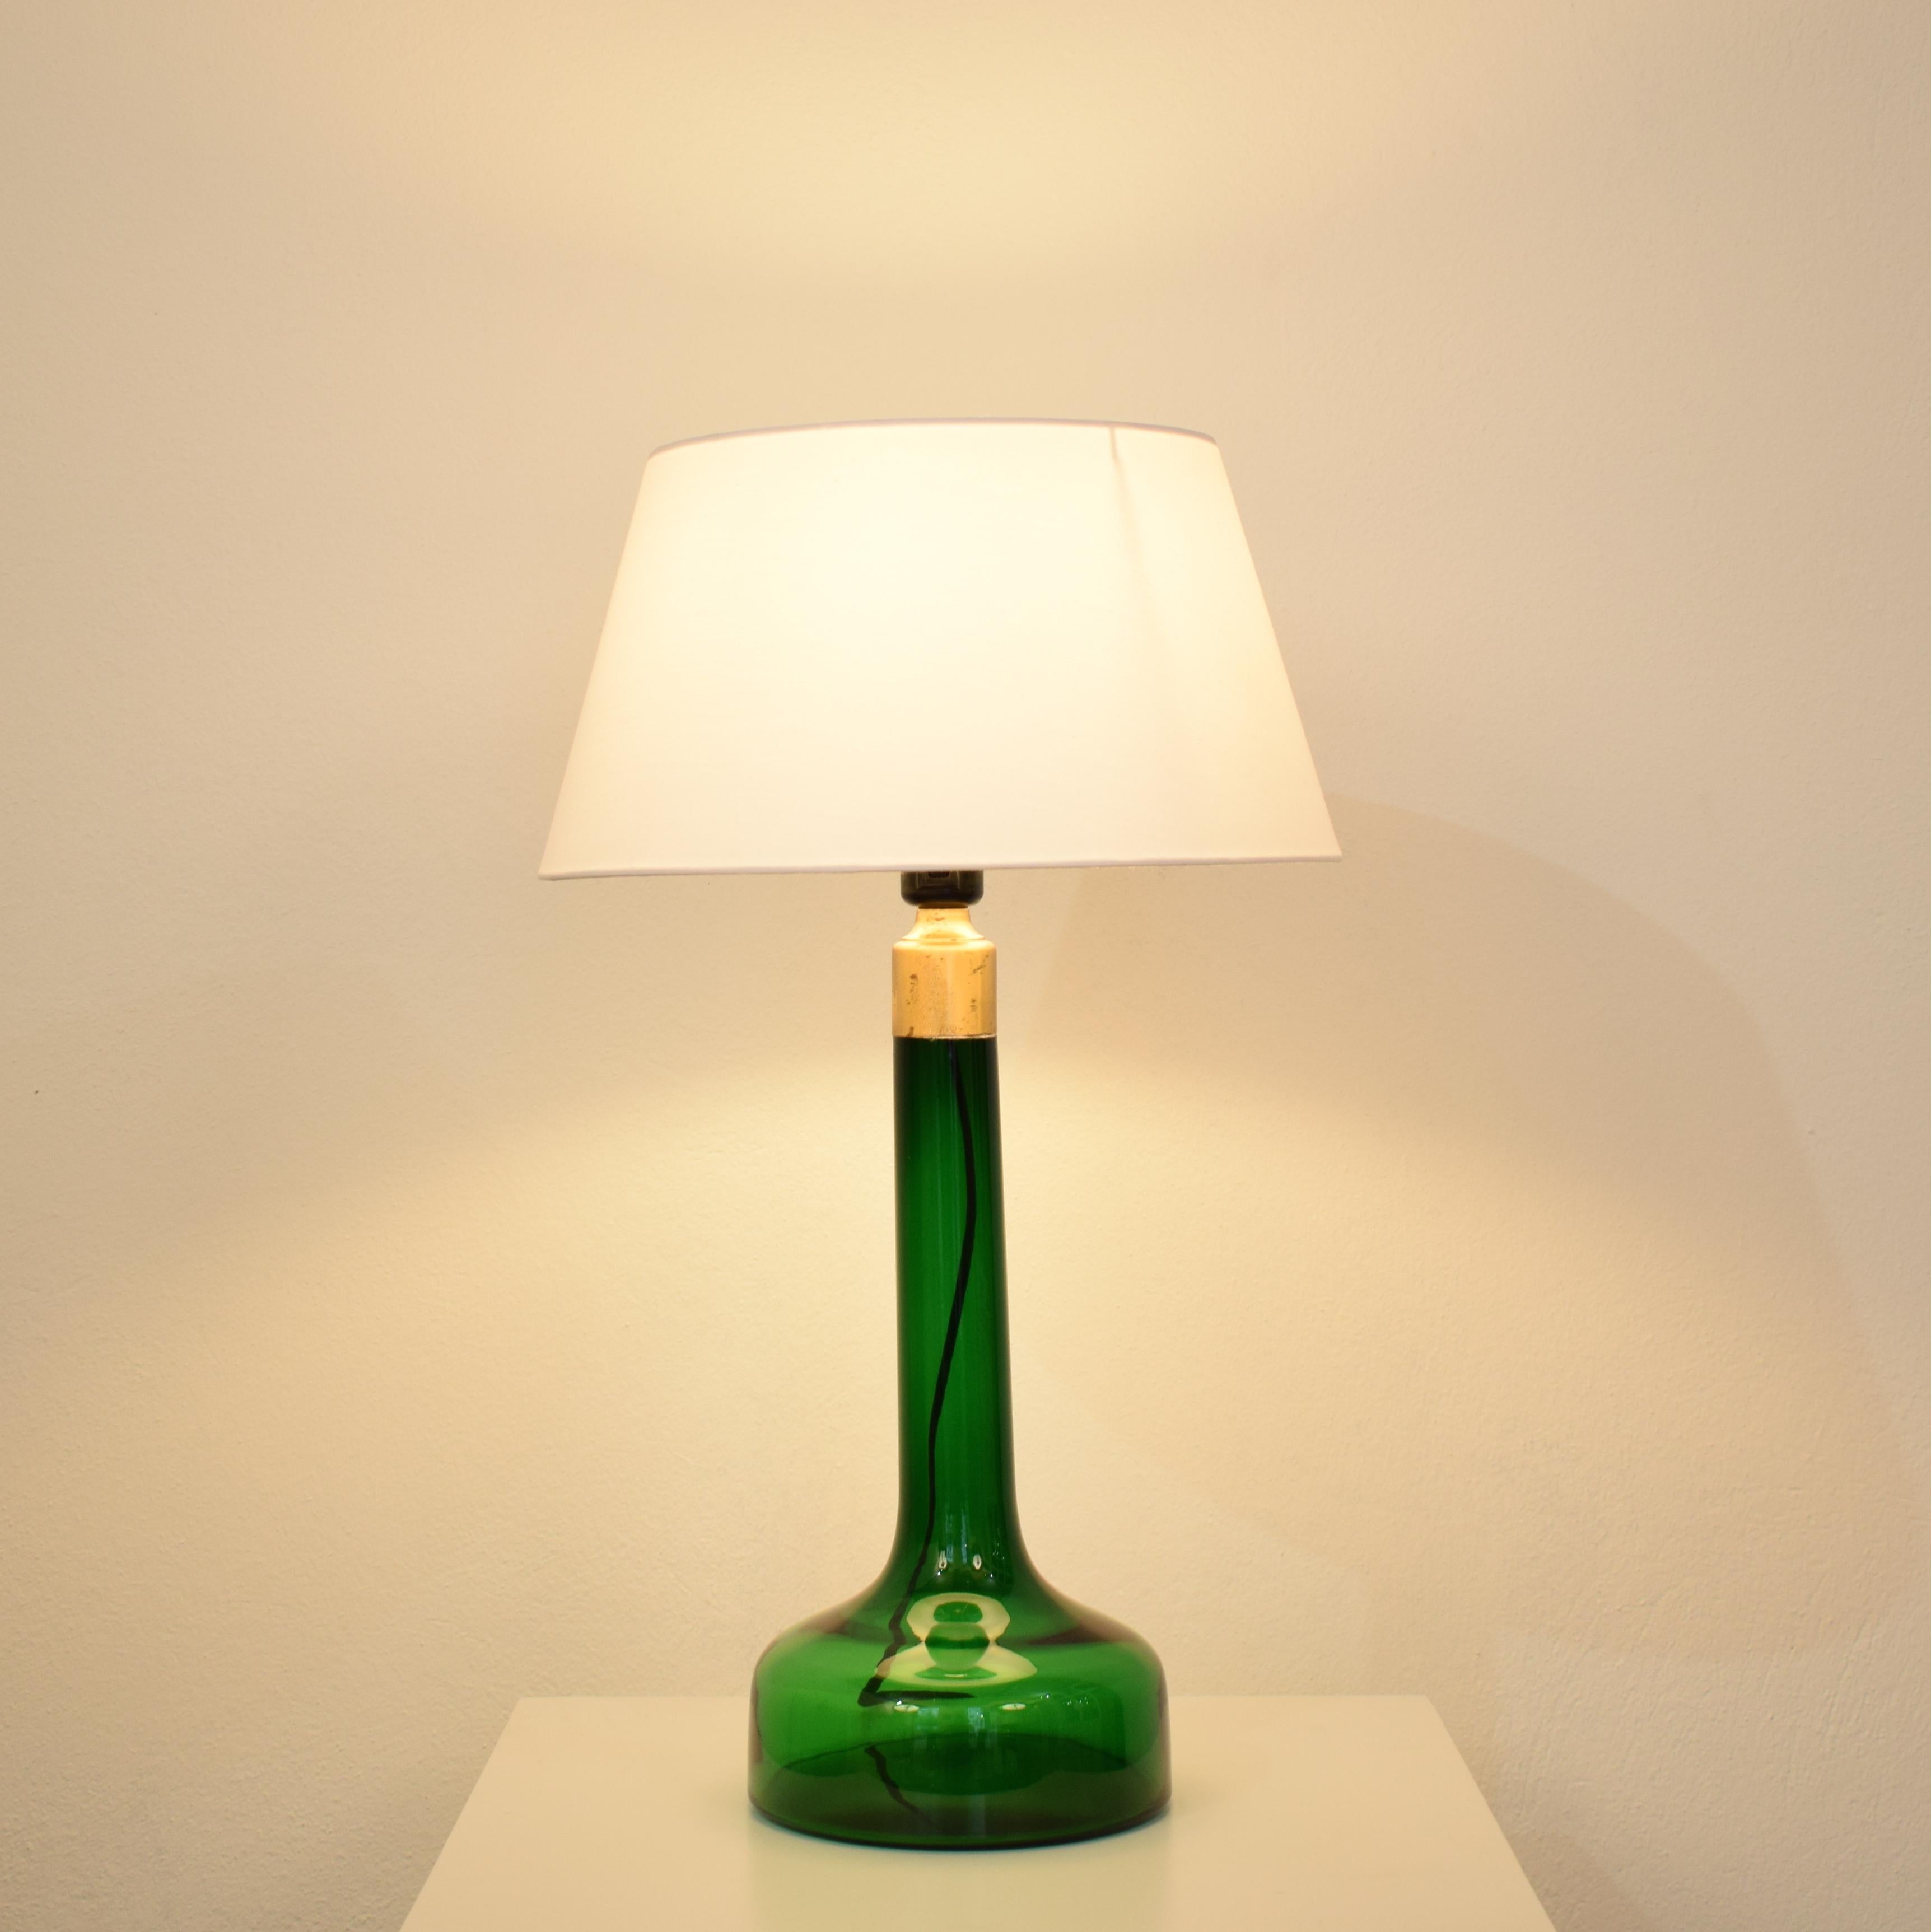 This elegant midcentury French table lamp was produced, circa 1970.
The lamp is made out of a deep green glass which gives a beautiful light.
The shade is replaced and in a white fabric.

A unique piece which is a great eyecatcher for your antique,